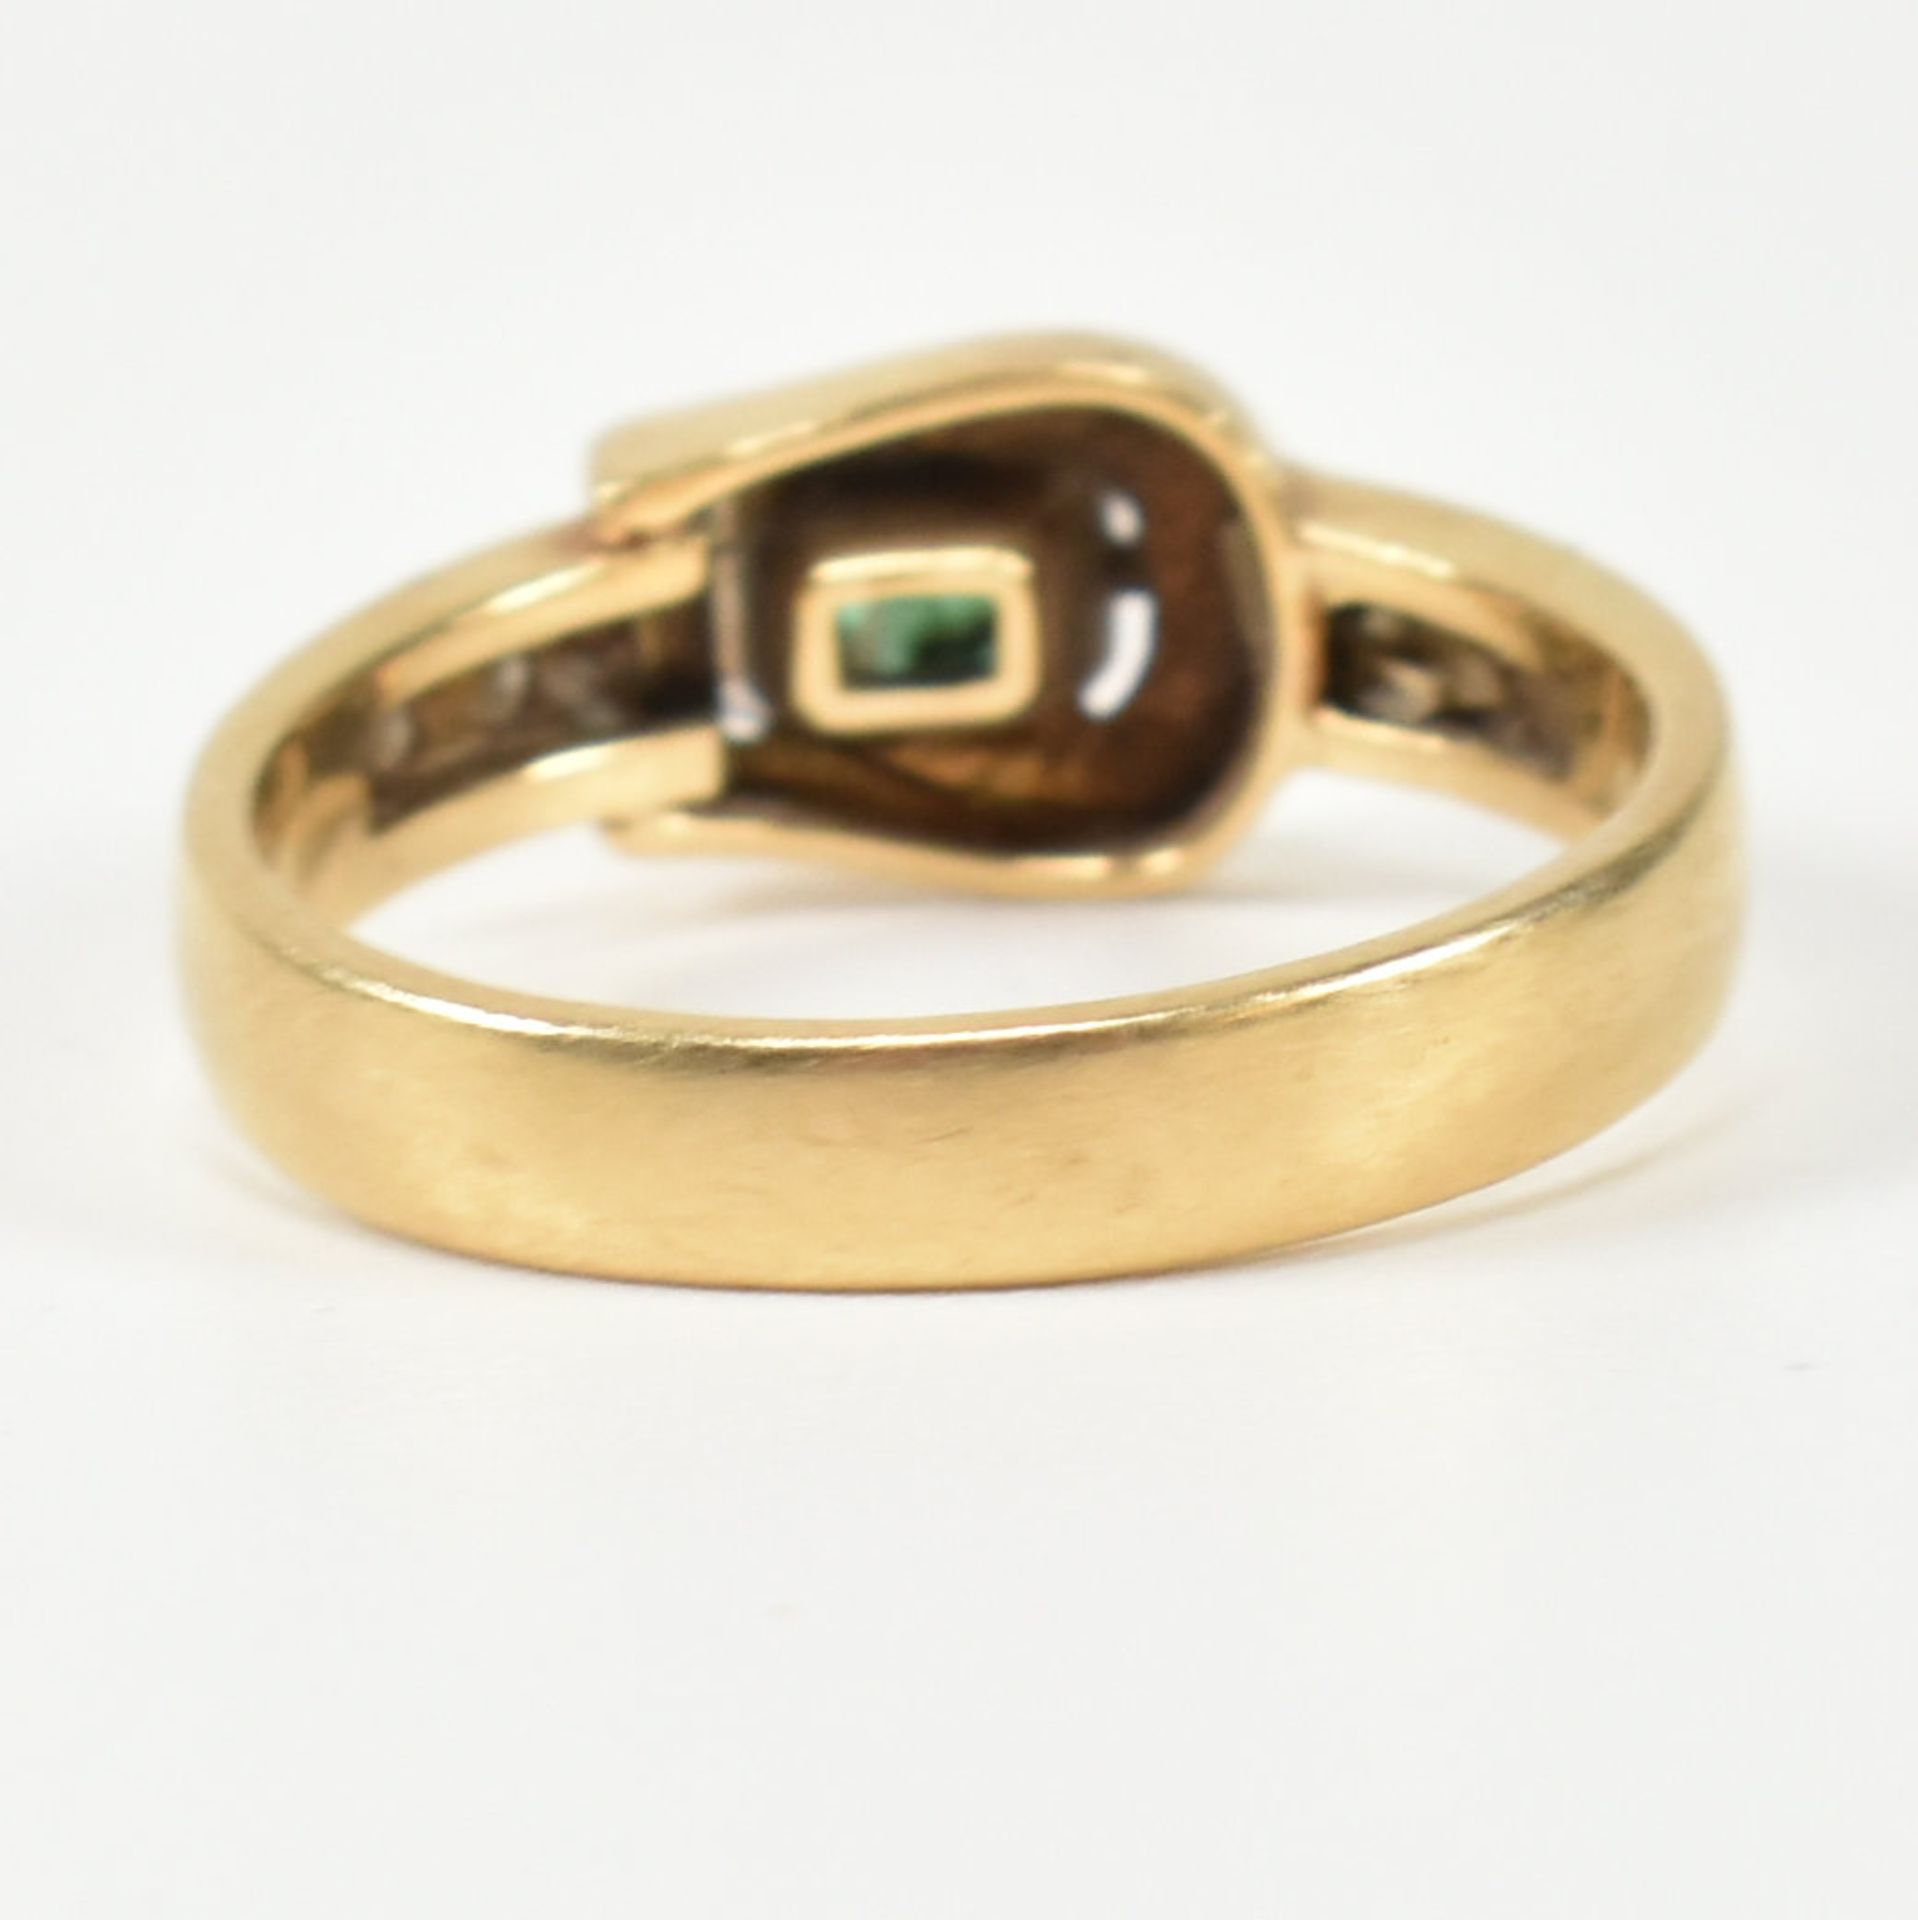 18CT GOLD DIAMOND & EMERALD BUCKLE RING - Image 5 of 7